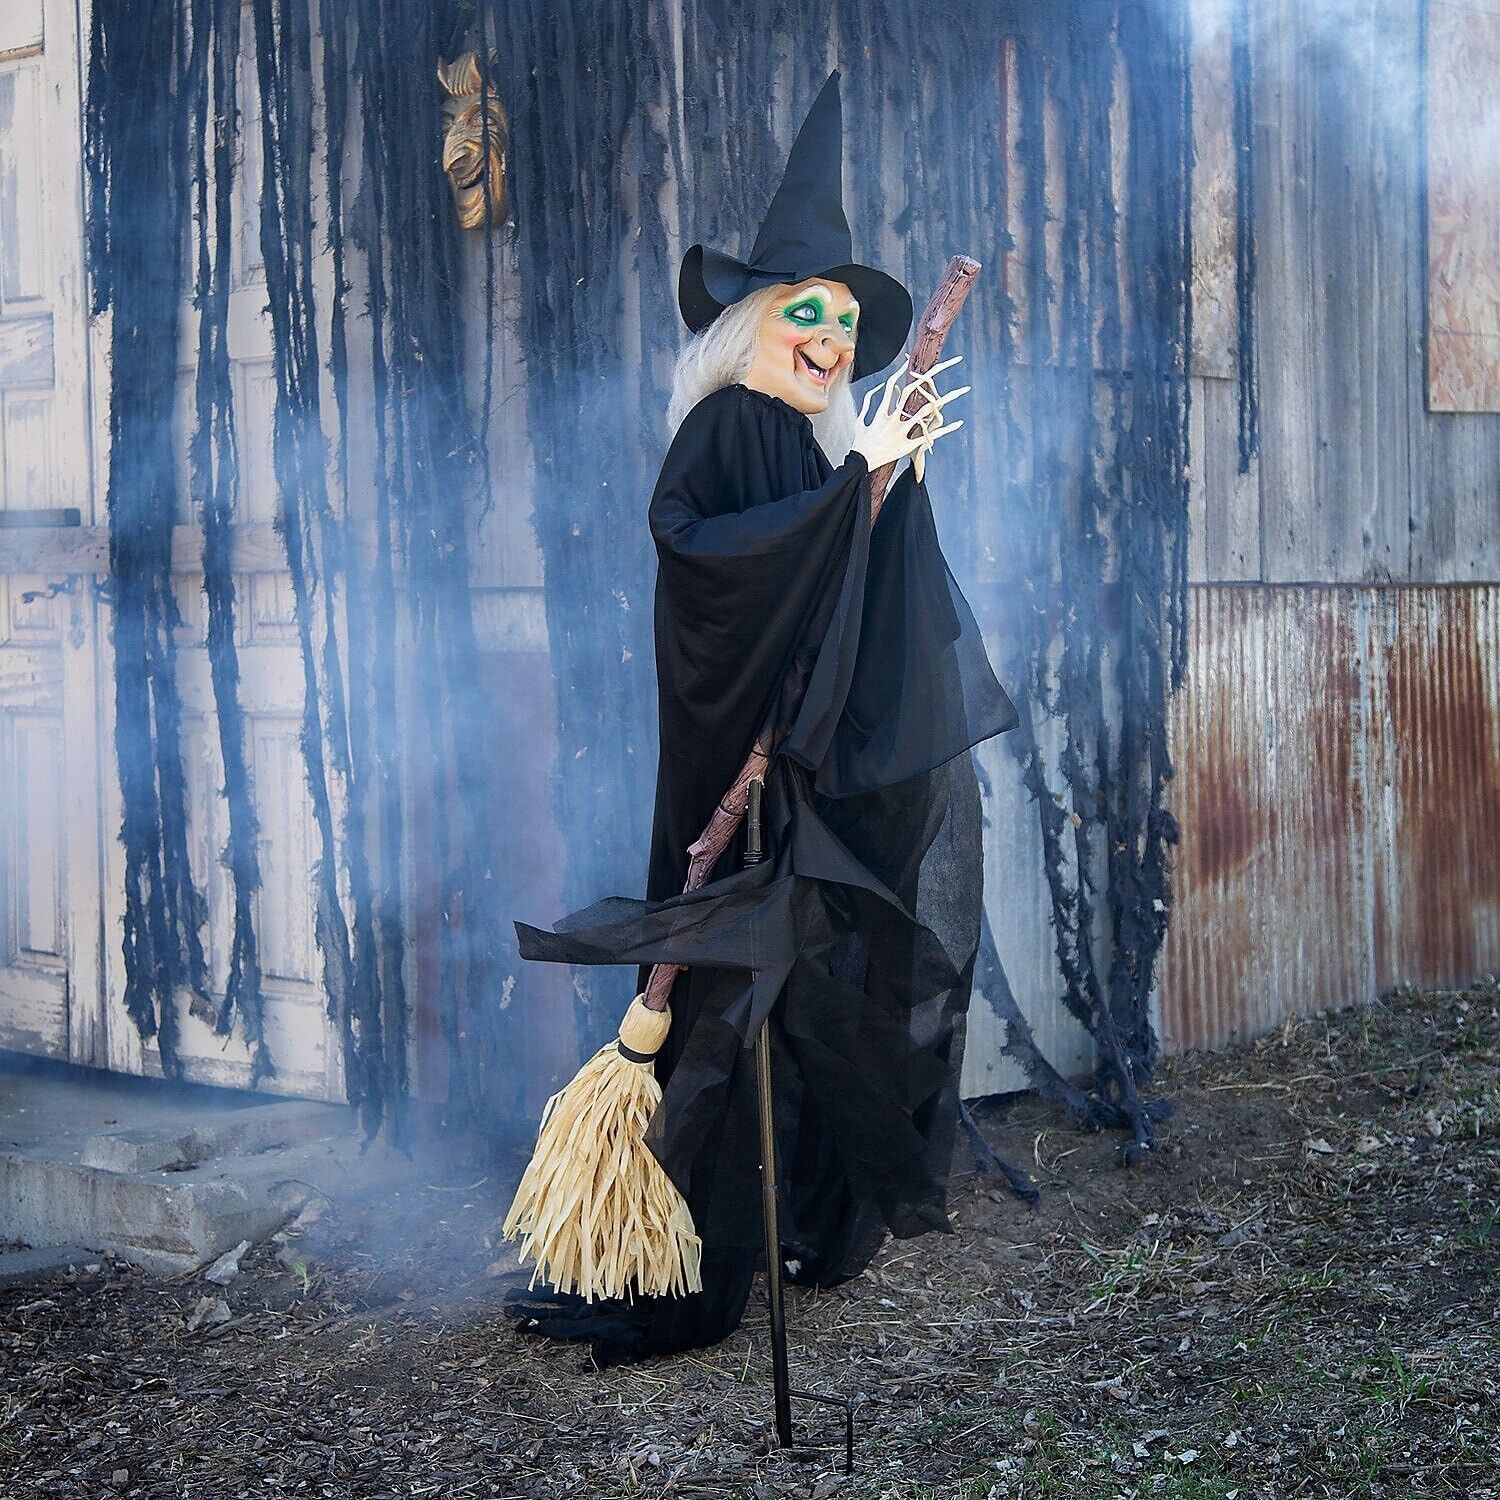 Fun Express 6 Foot Flying Witch Halloween Prop